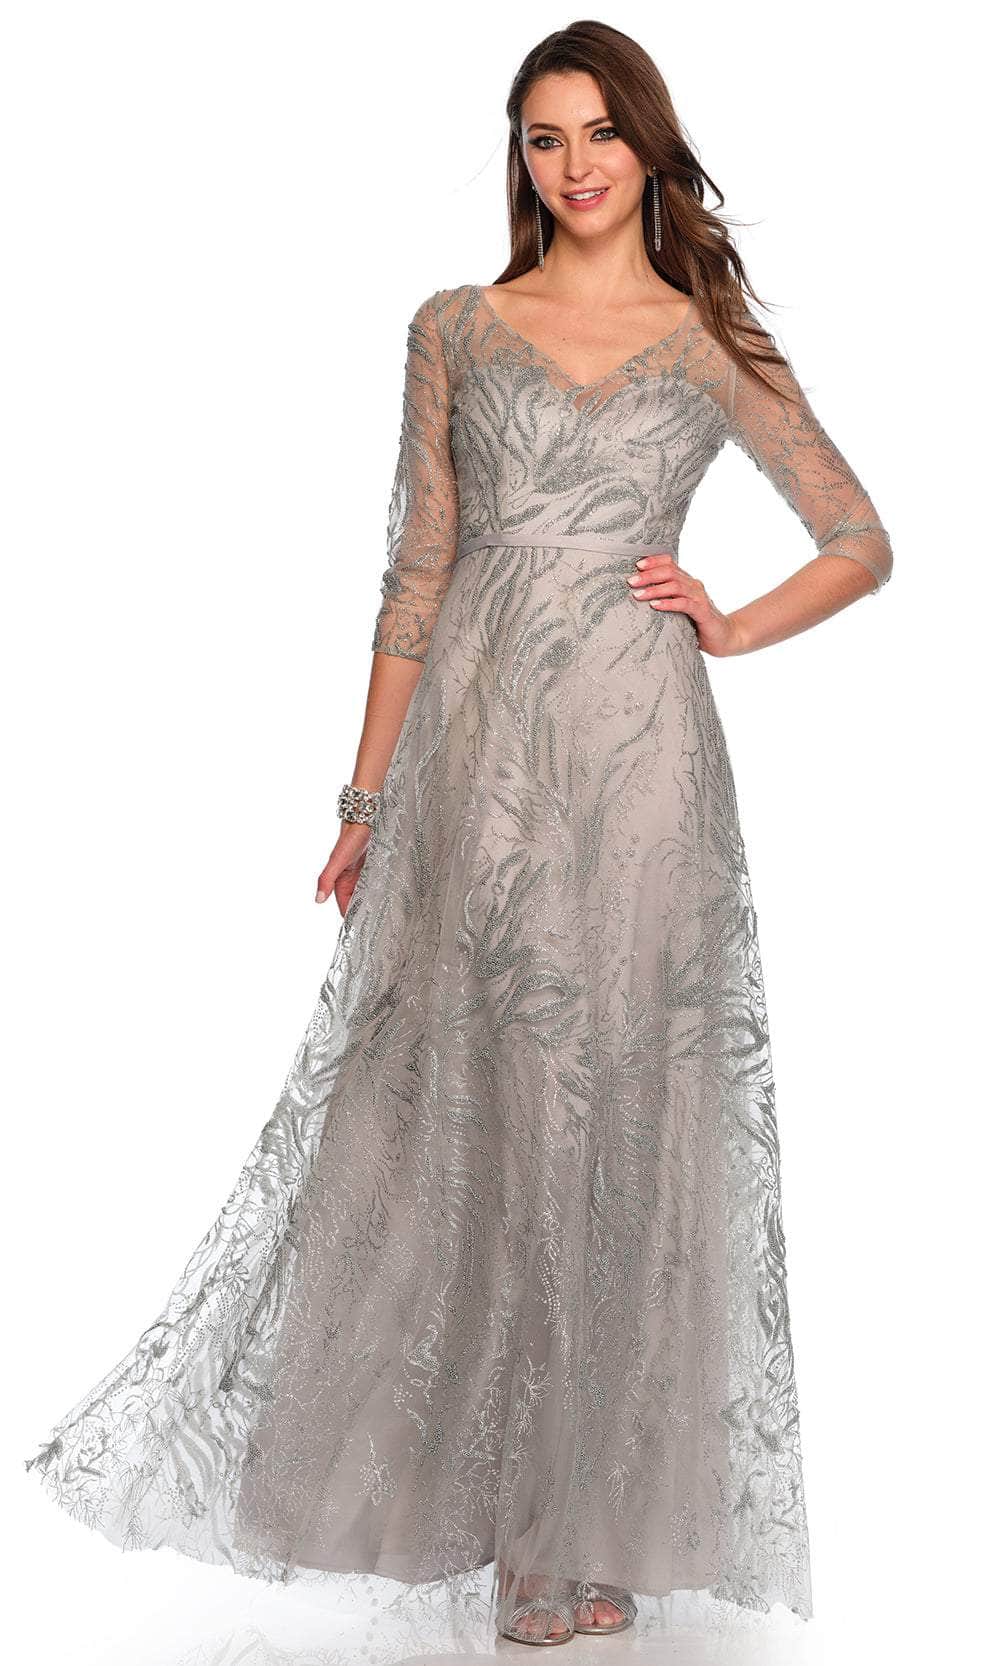 Dave & Johnny 11606 - V-Neck Beaded Prom Gown
